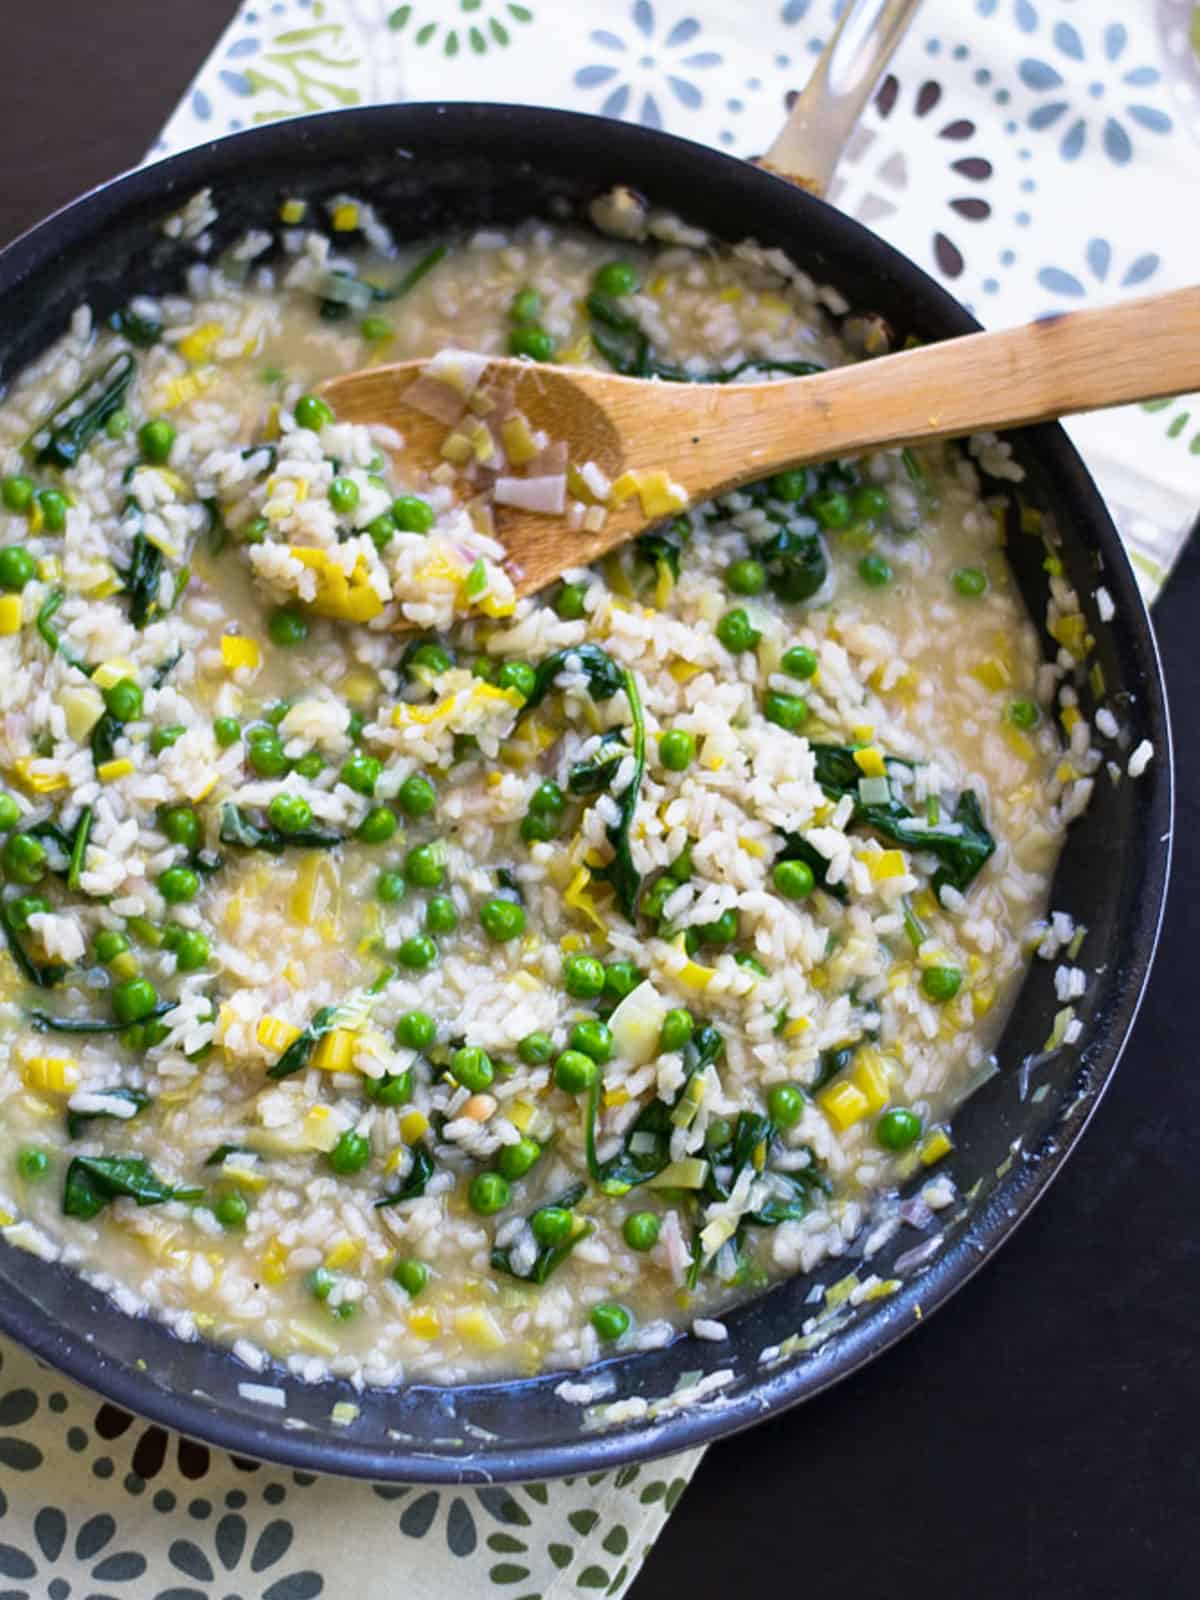 Spinach risotto with sautéed leeks and peas.